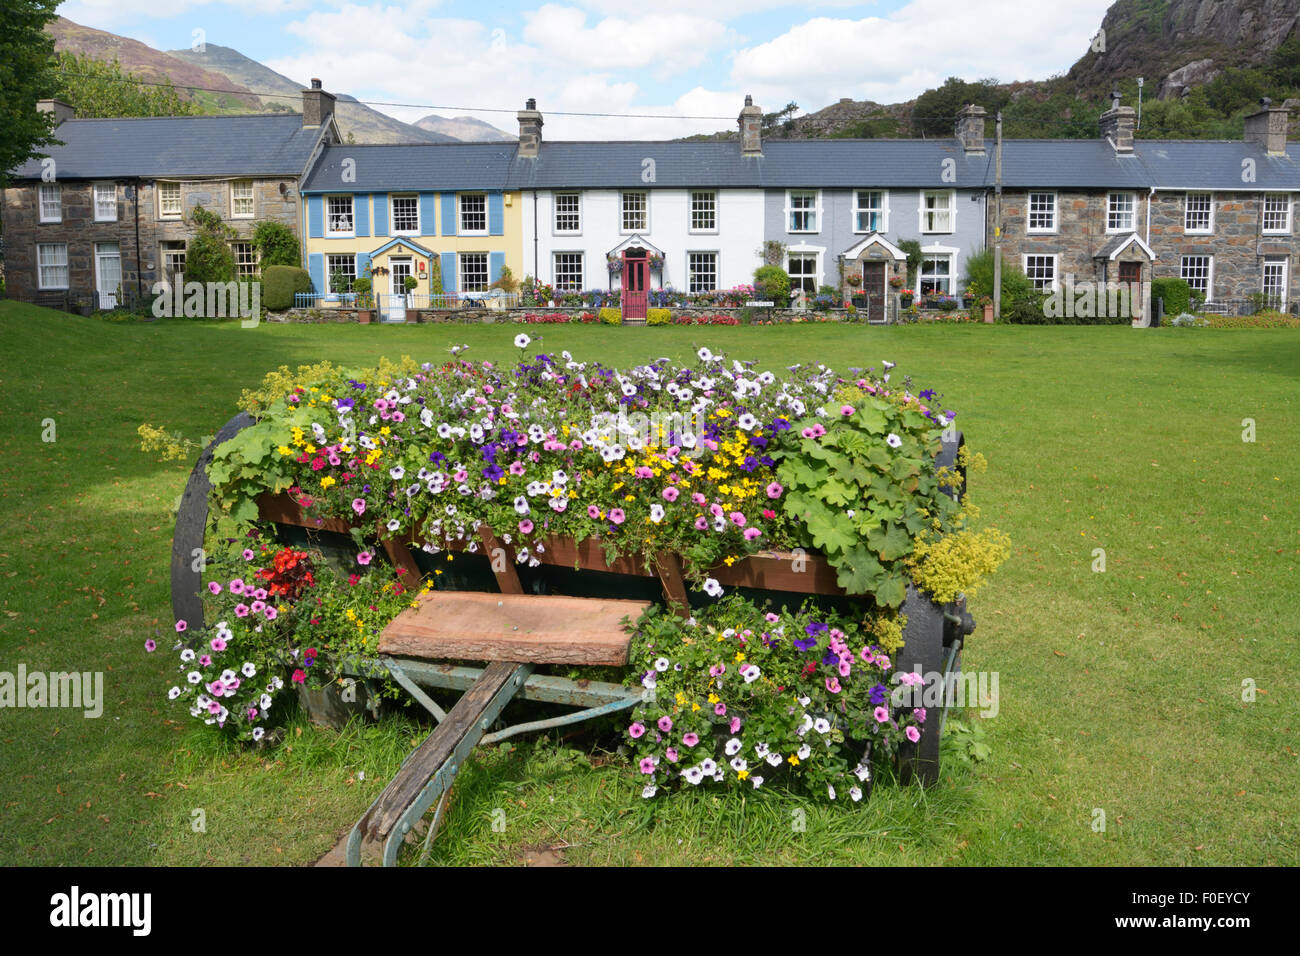 The village of Beddgelert (Gelerts Grave), a tourist attraction in the Snowdonia National Park. Stock Photo